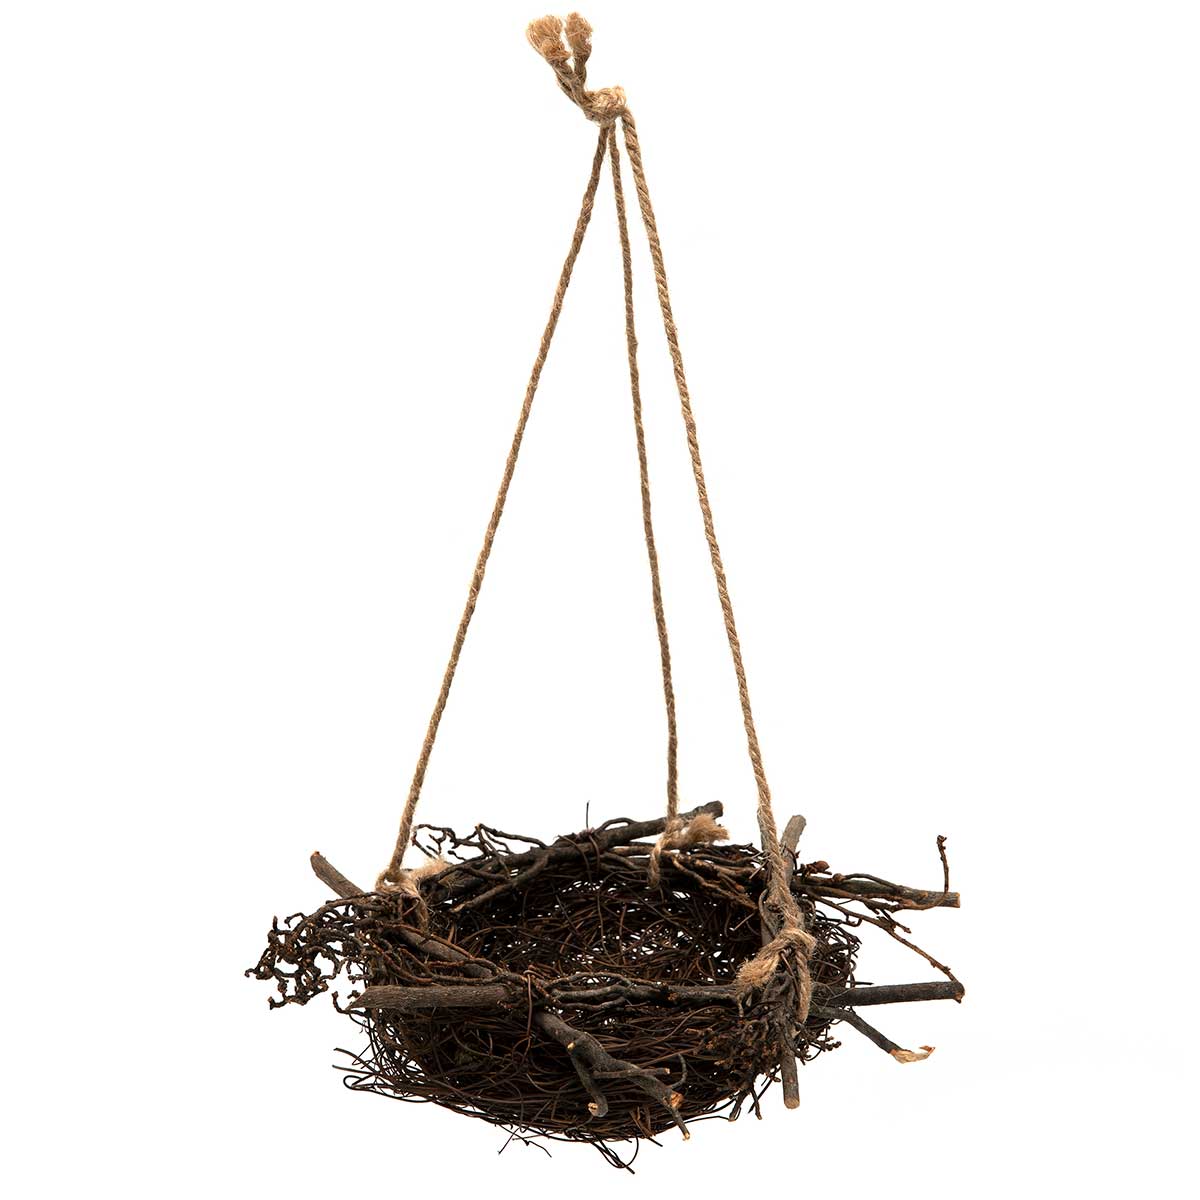 NESTINGS TWIG NEST WITH TWINE HANGER SMALL 5"X2"